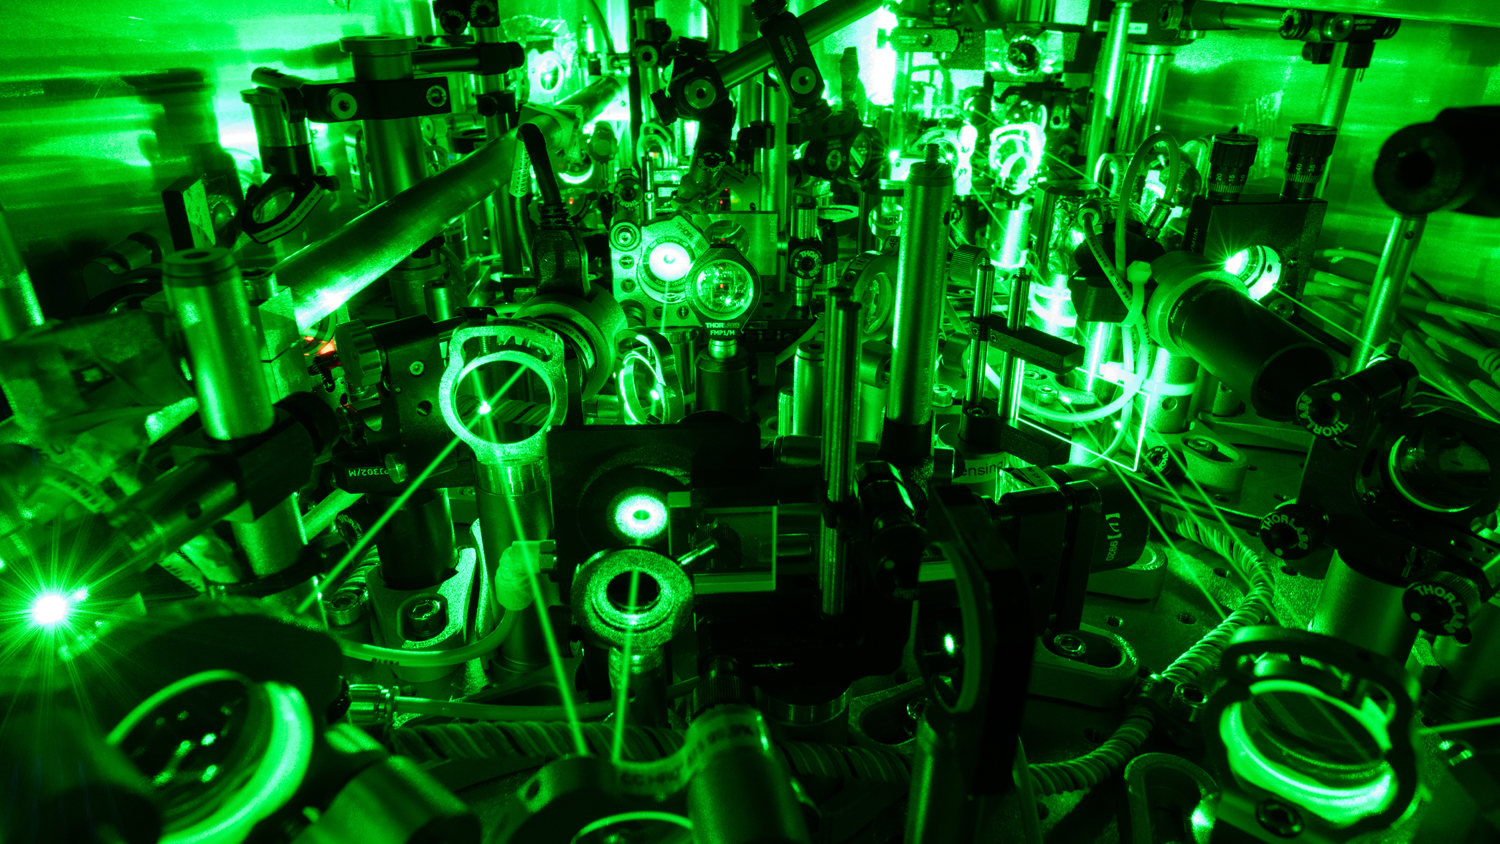 High-power laser system (OPCPA) in the laboratory of the Ultrafast Laser Physics research group at ETH Zurich, which was used for the experiments [3].